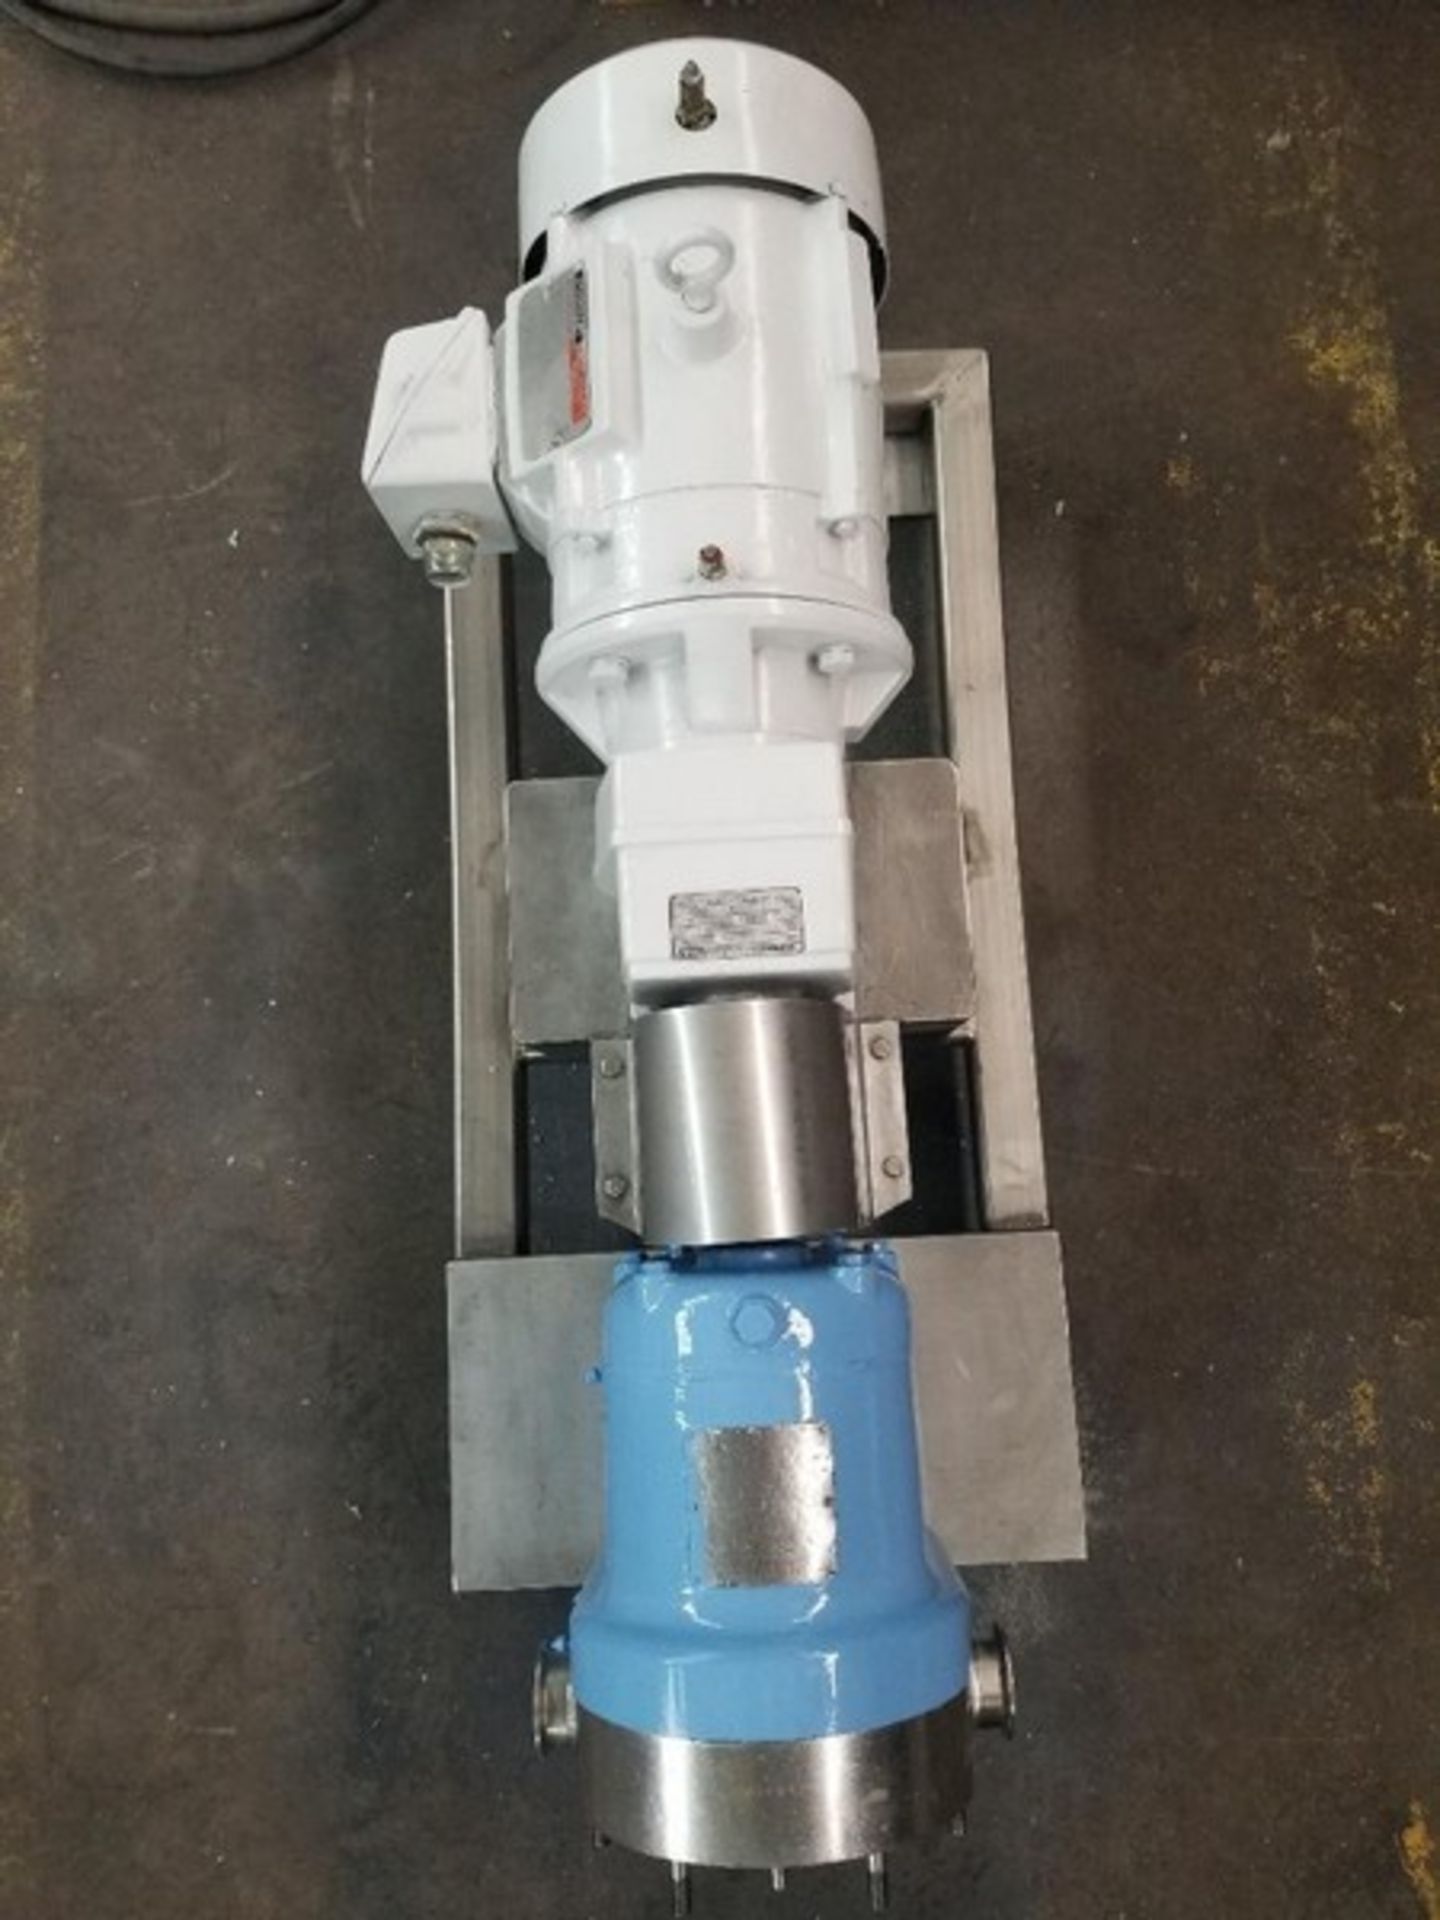 Waukesha 5 hp S/S Positive Displacement Pump with 2-1/2" Tri-Clamp Inlet and Outlet, 230/460 V - Image 2 of 9